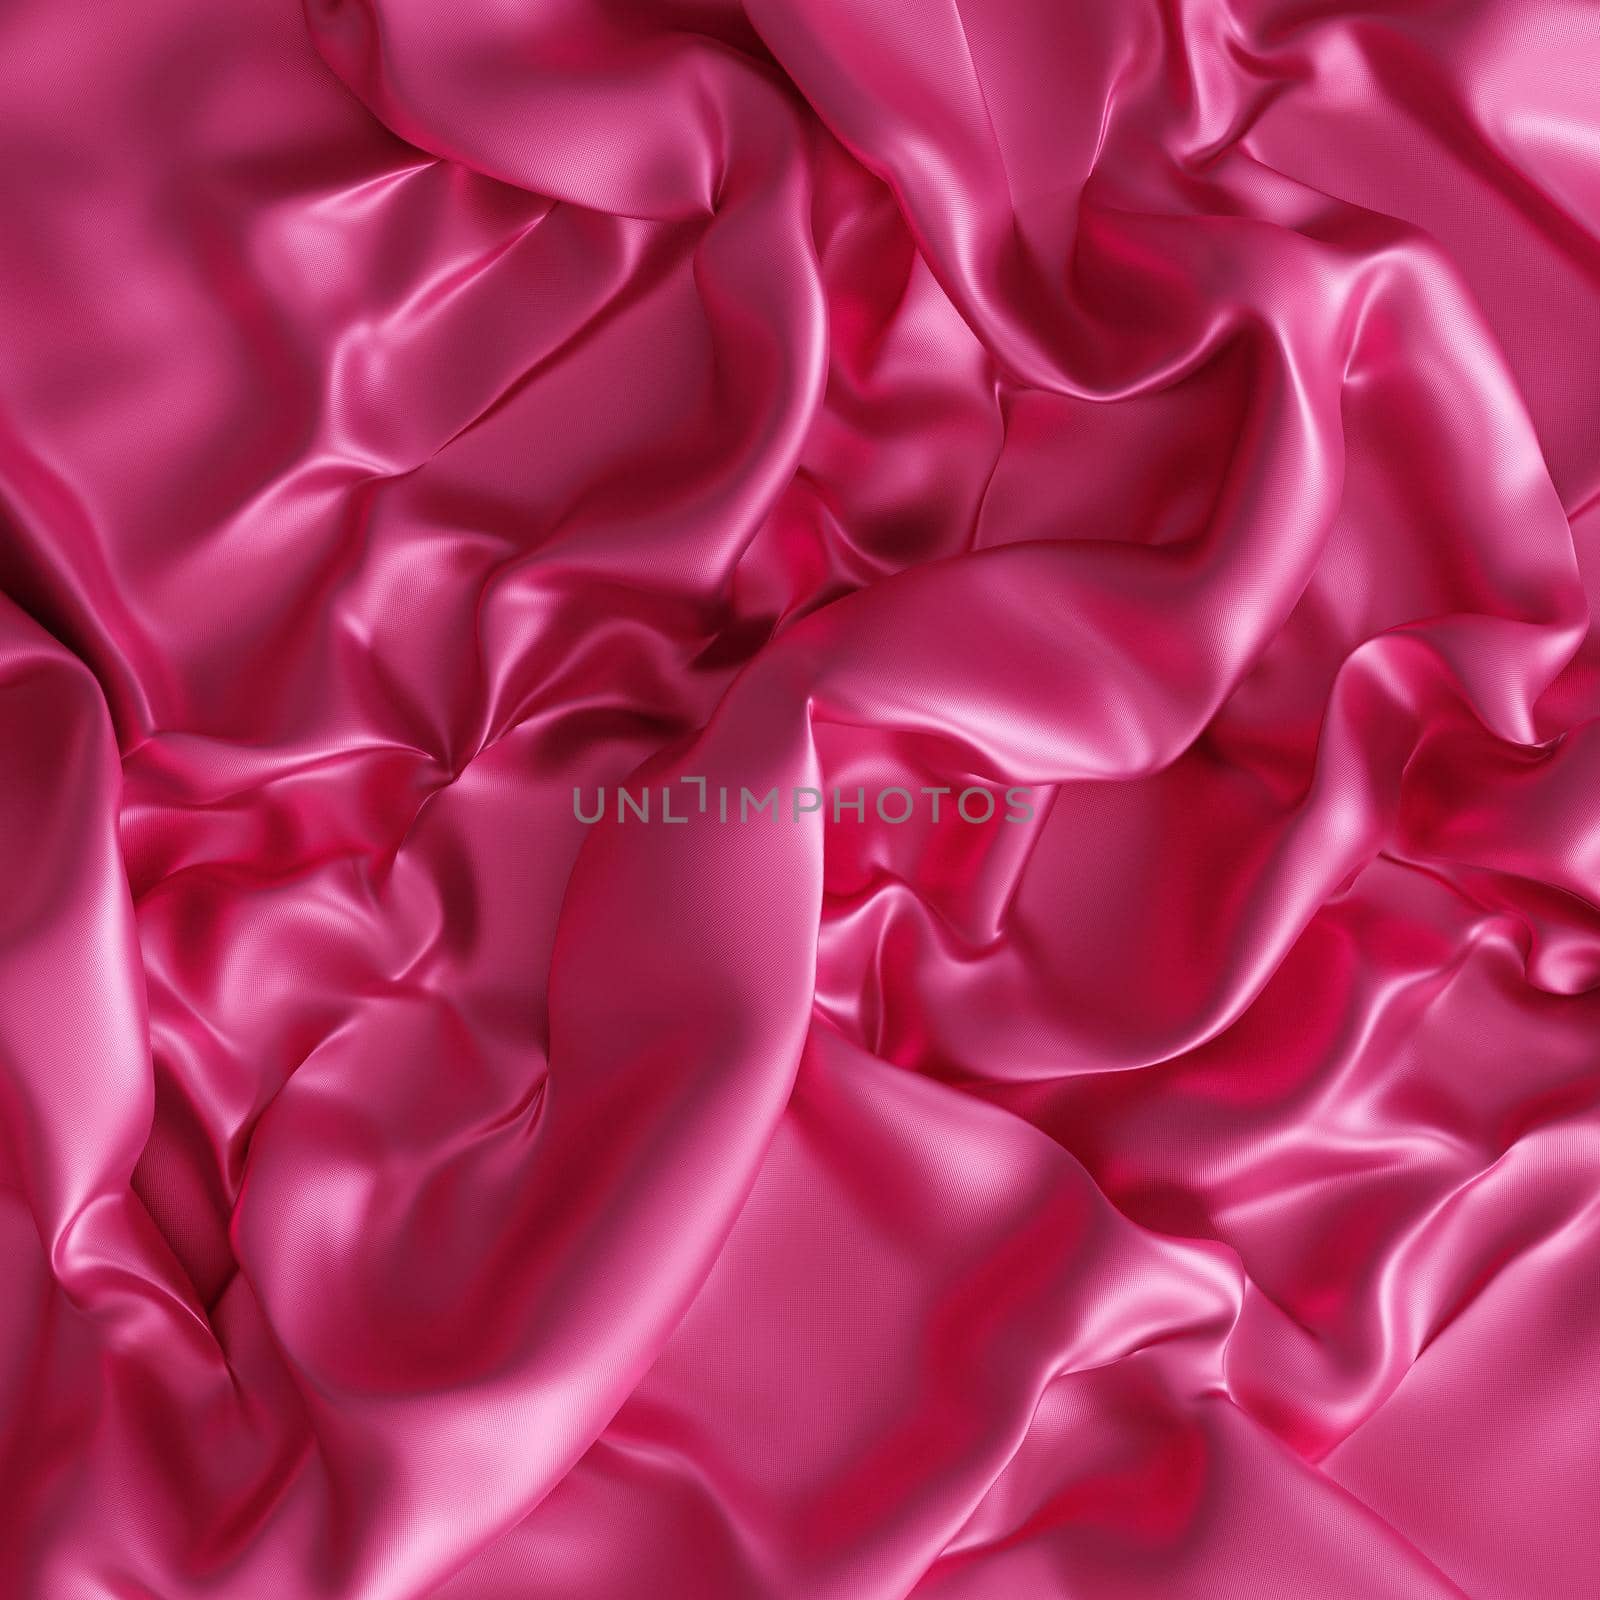 Pink shiny satin or silk textile, luxury cloth with folds, 3d rendering background